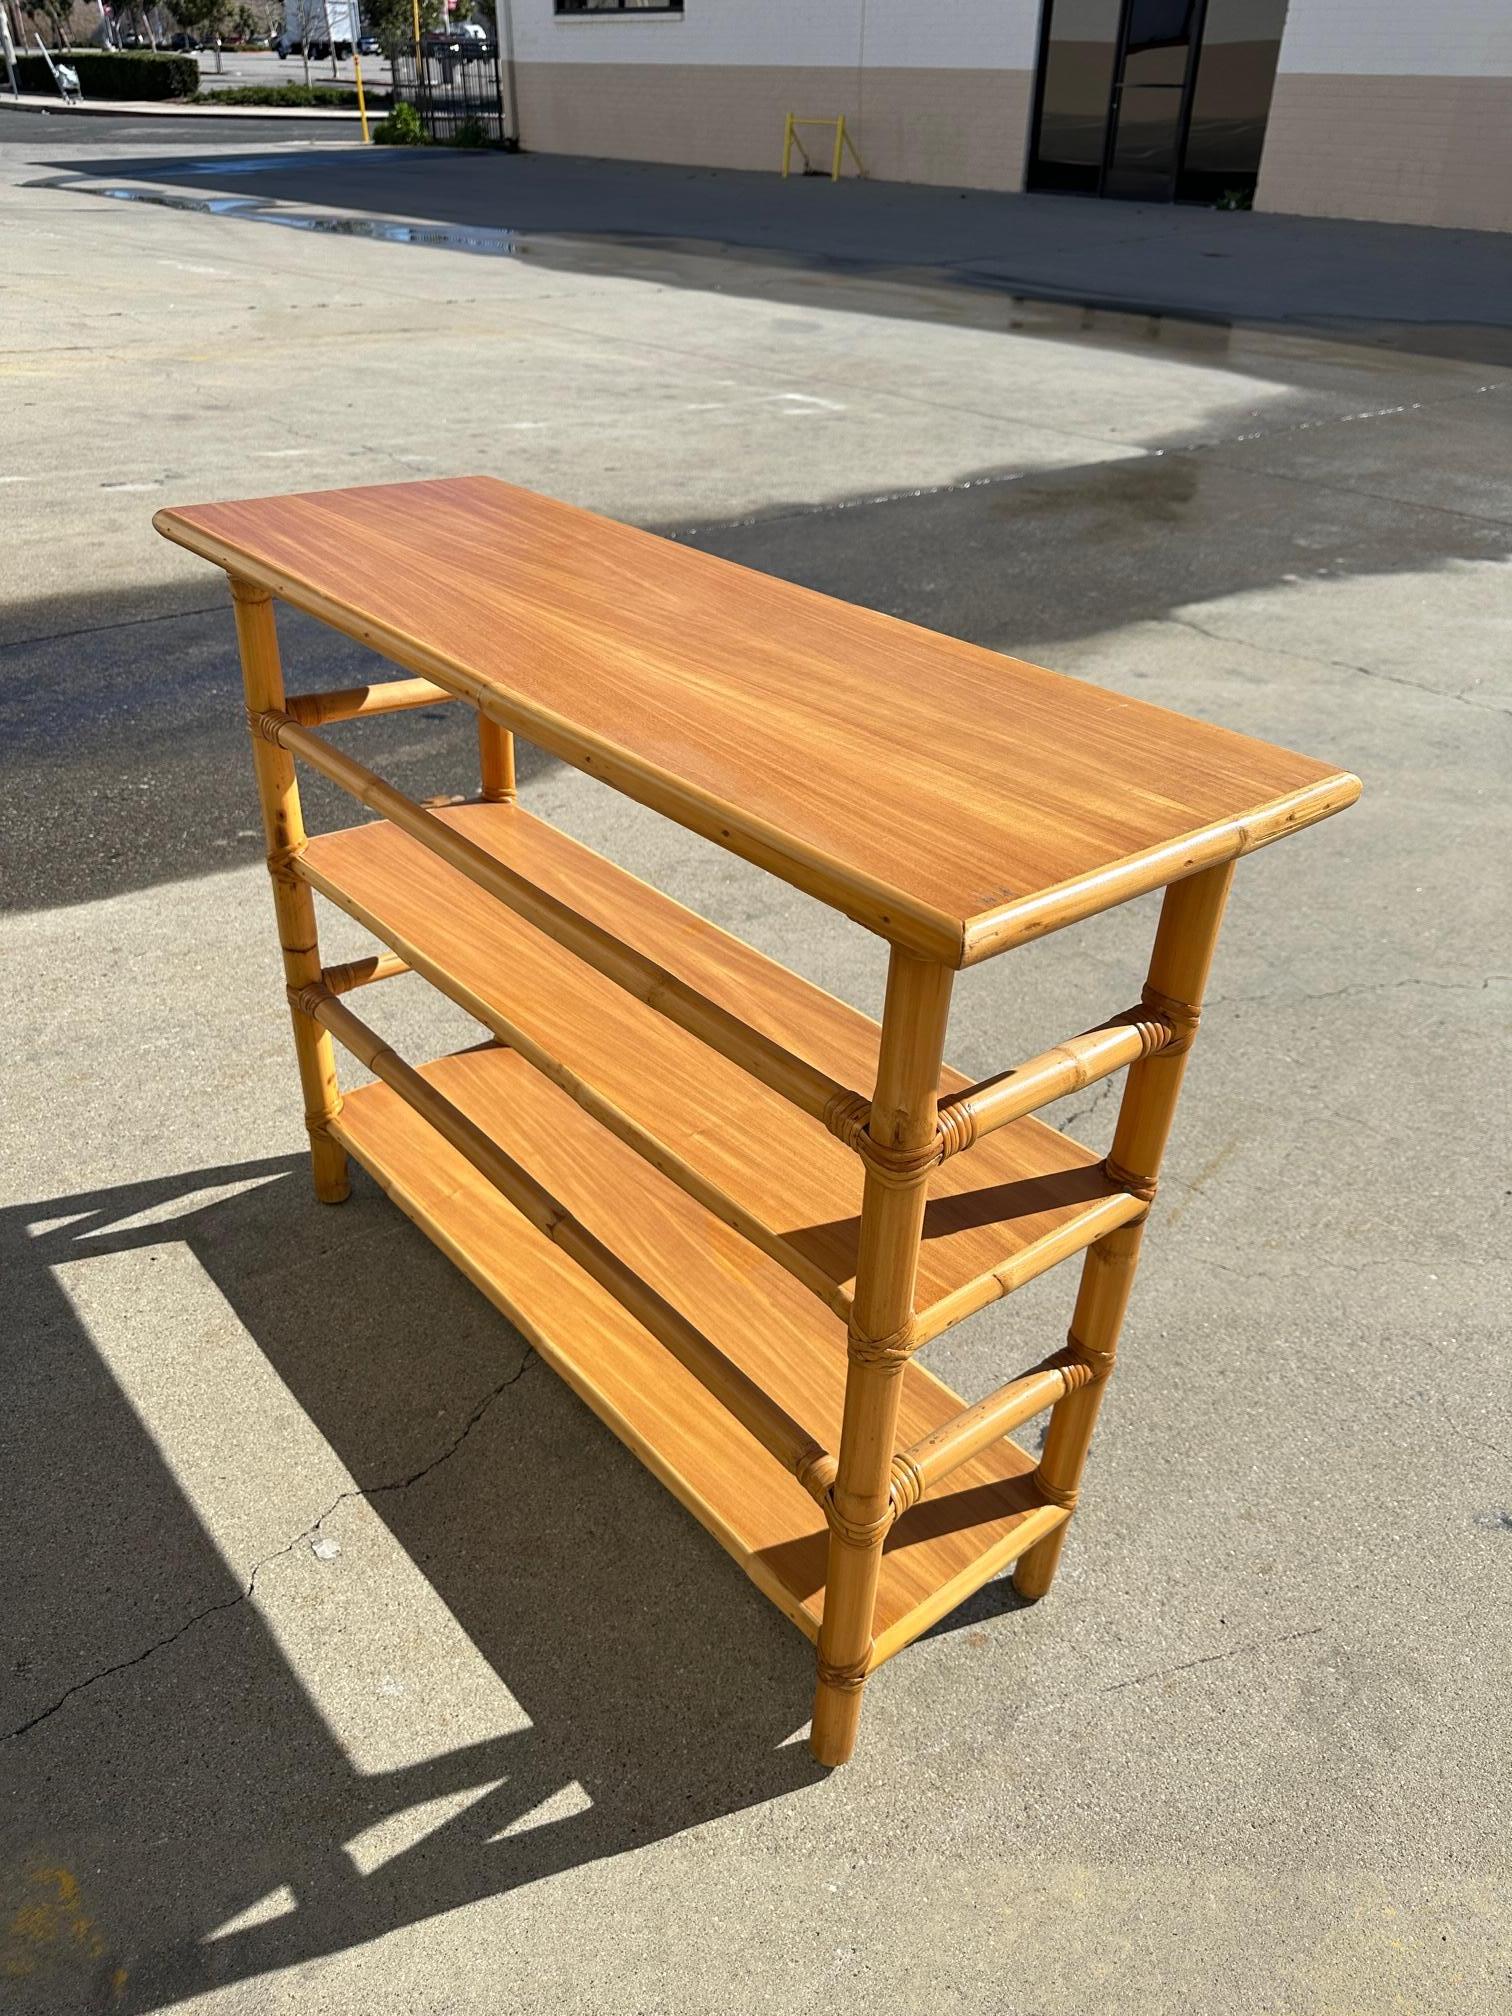 Postwar three-tier console table Bookshelf with mahogany tops and a wrapped stick rattan frame. The table has mahogany tops along each shelf which are decorated with rattan trim and each shelf has rattan pole rails for holding books in place. 

This